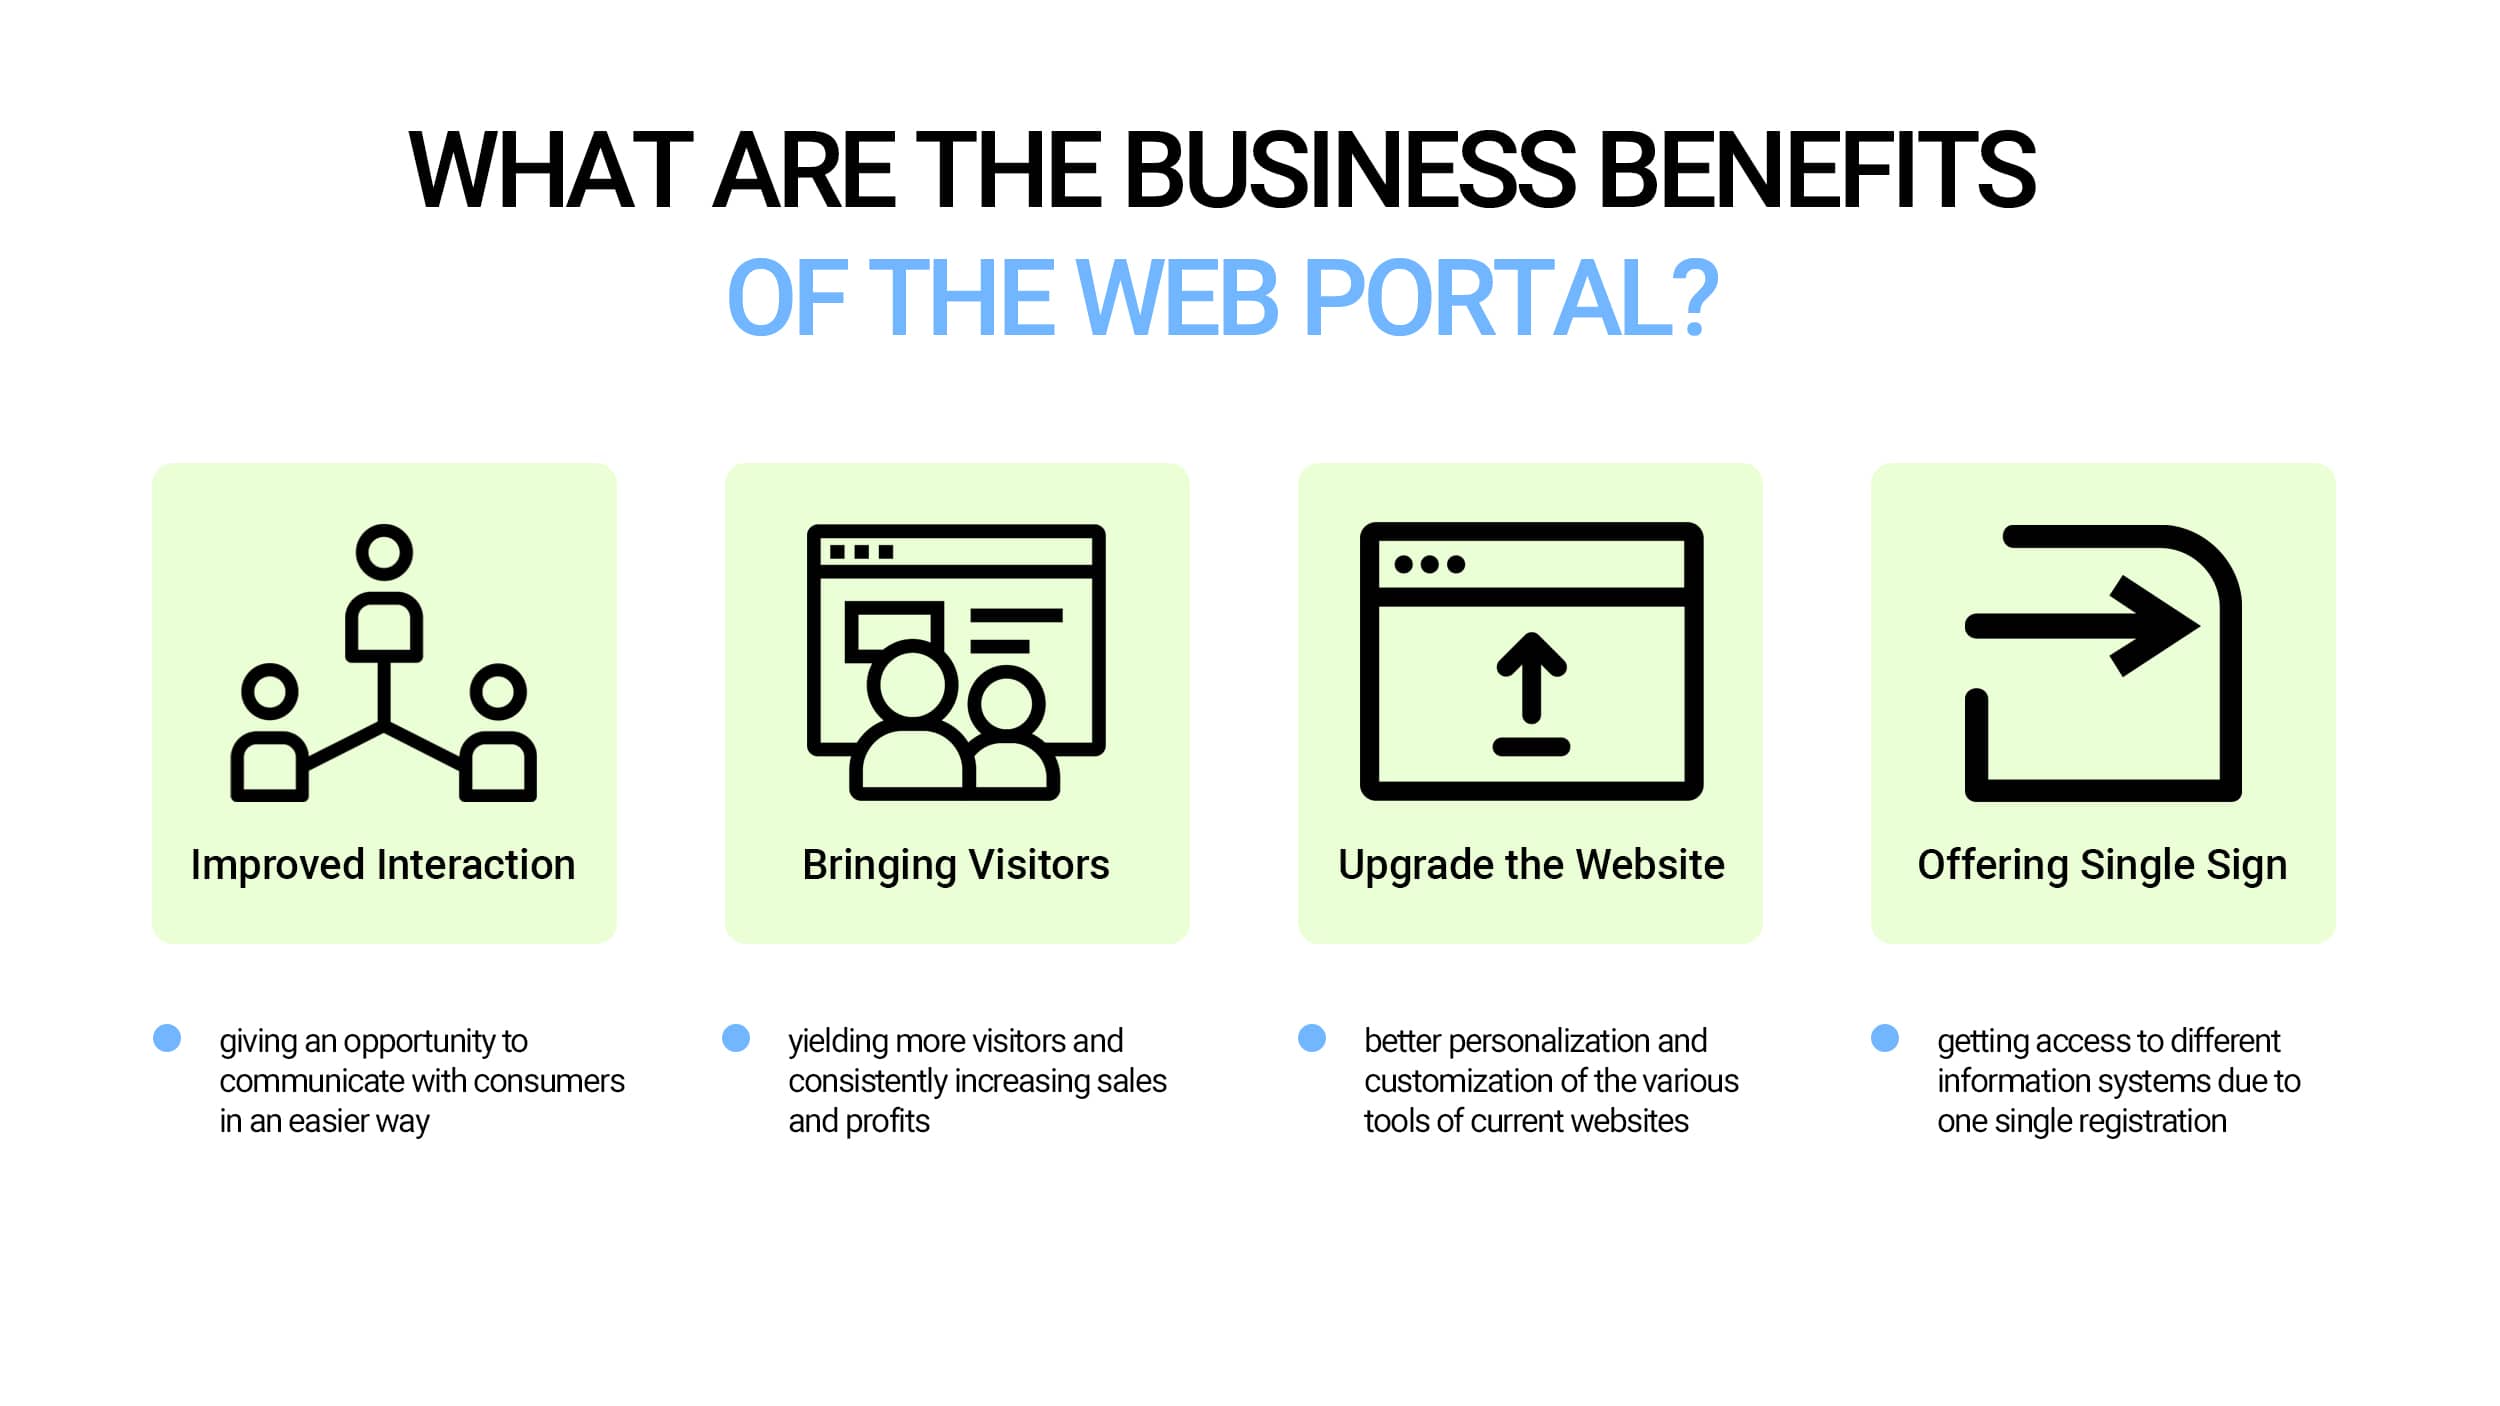 Business benefits of the Web portal